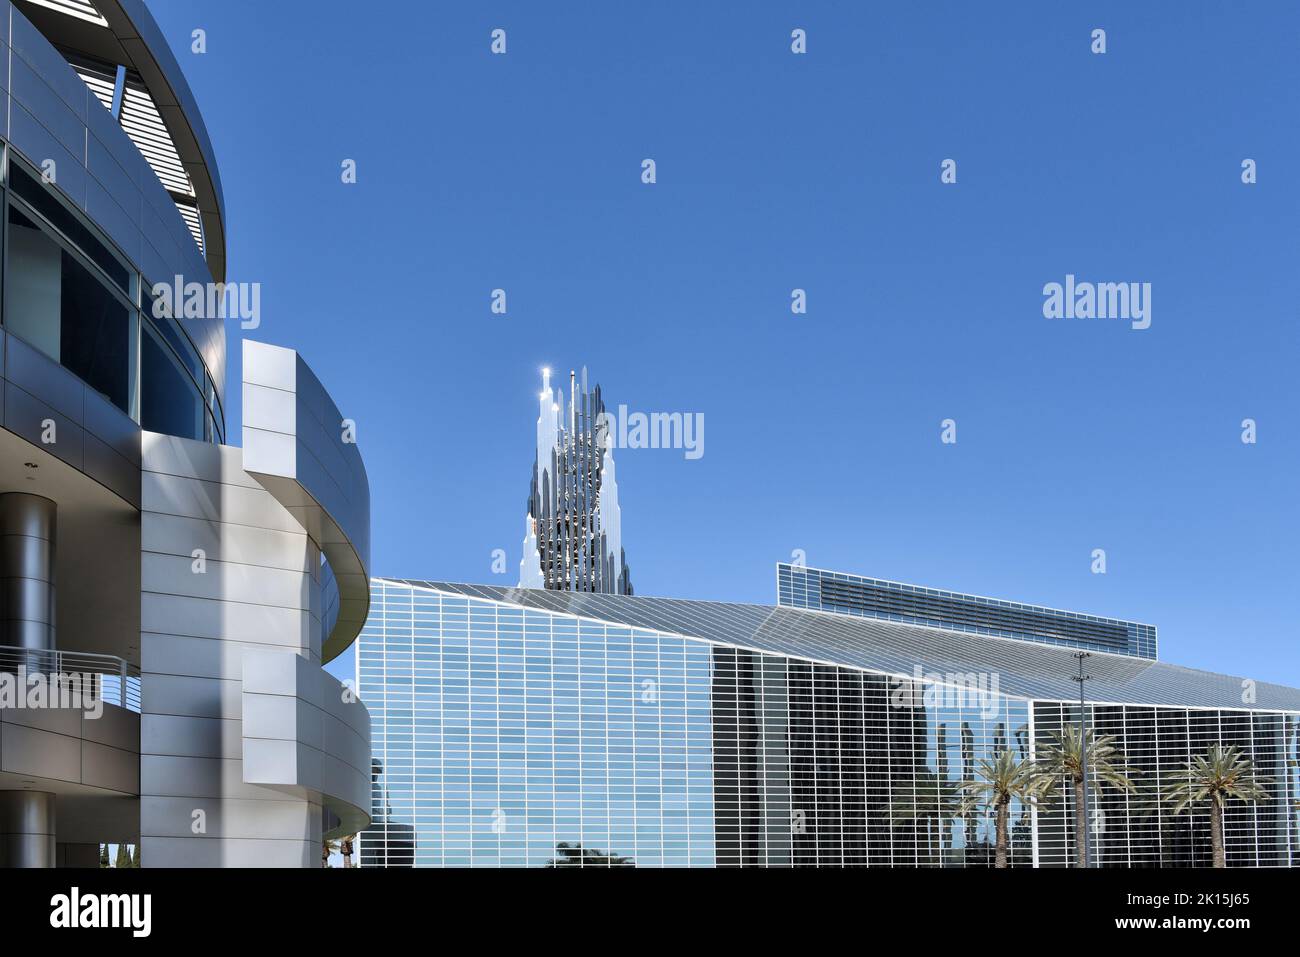 GARDEN GROVE, CALIFORNIA - 20 MAR 2021: Closeup of buildings at the Crystal Cathedral. Stock Photo